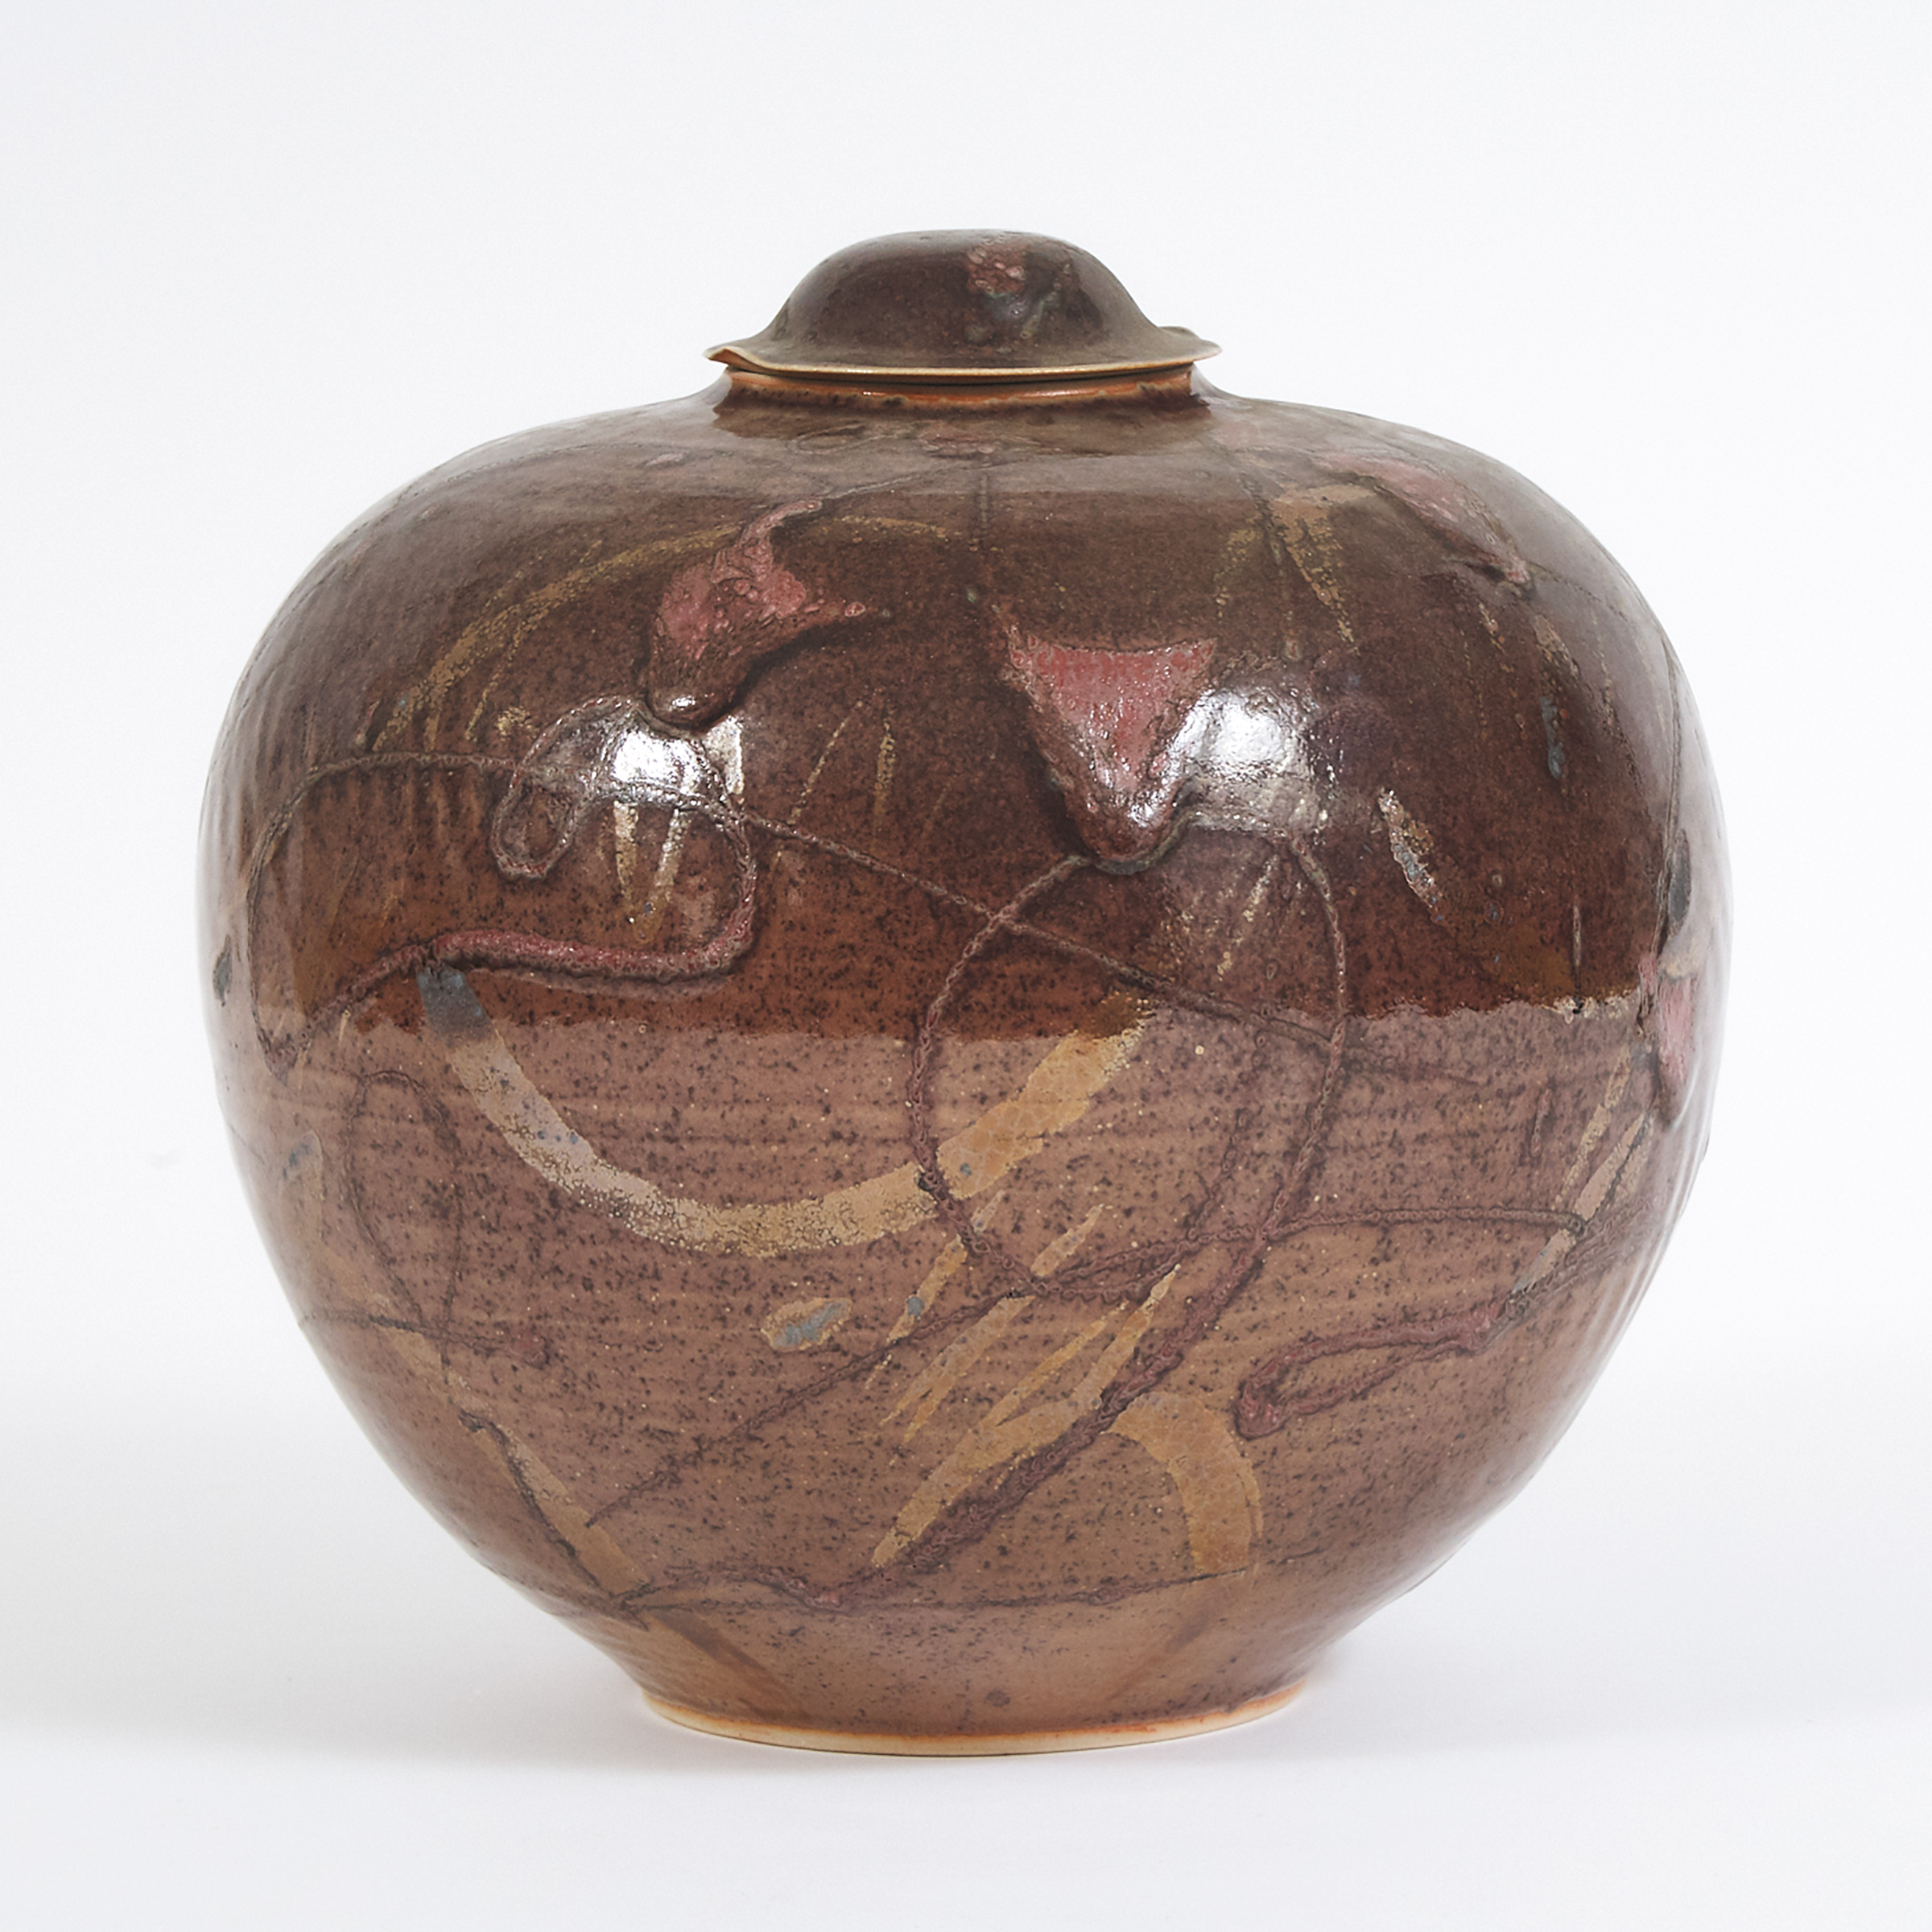 Kayo O'Young (Canadian, b.1950), Dark Brown Glazed Covered Vase, 1993